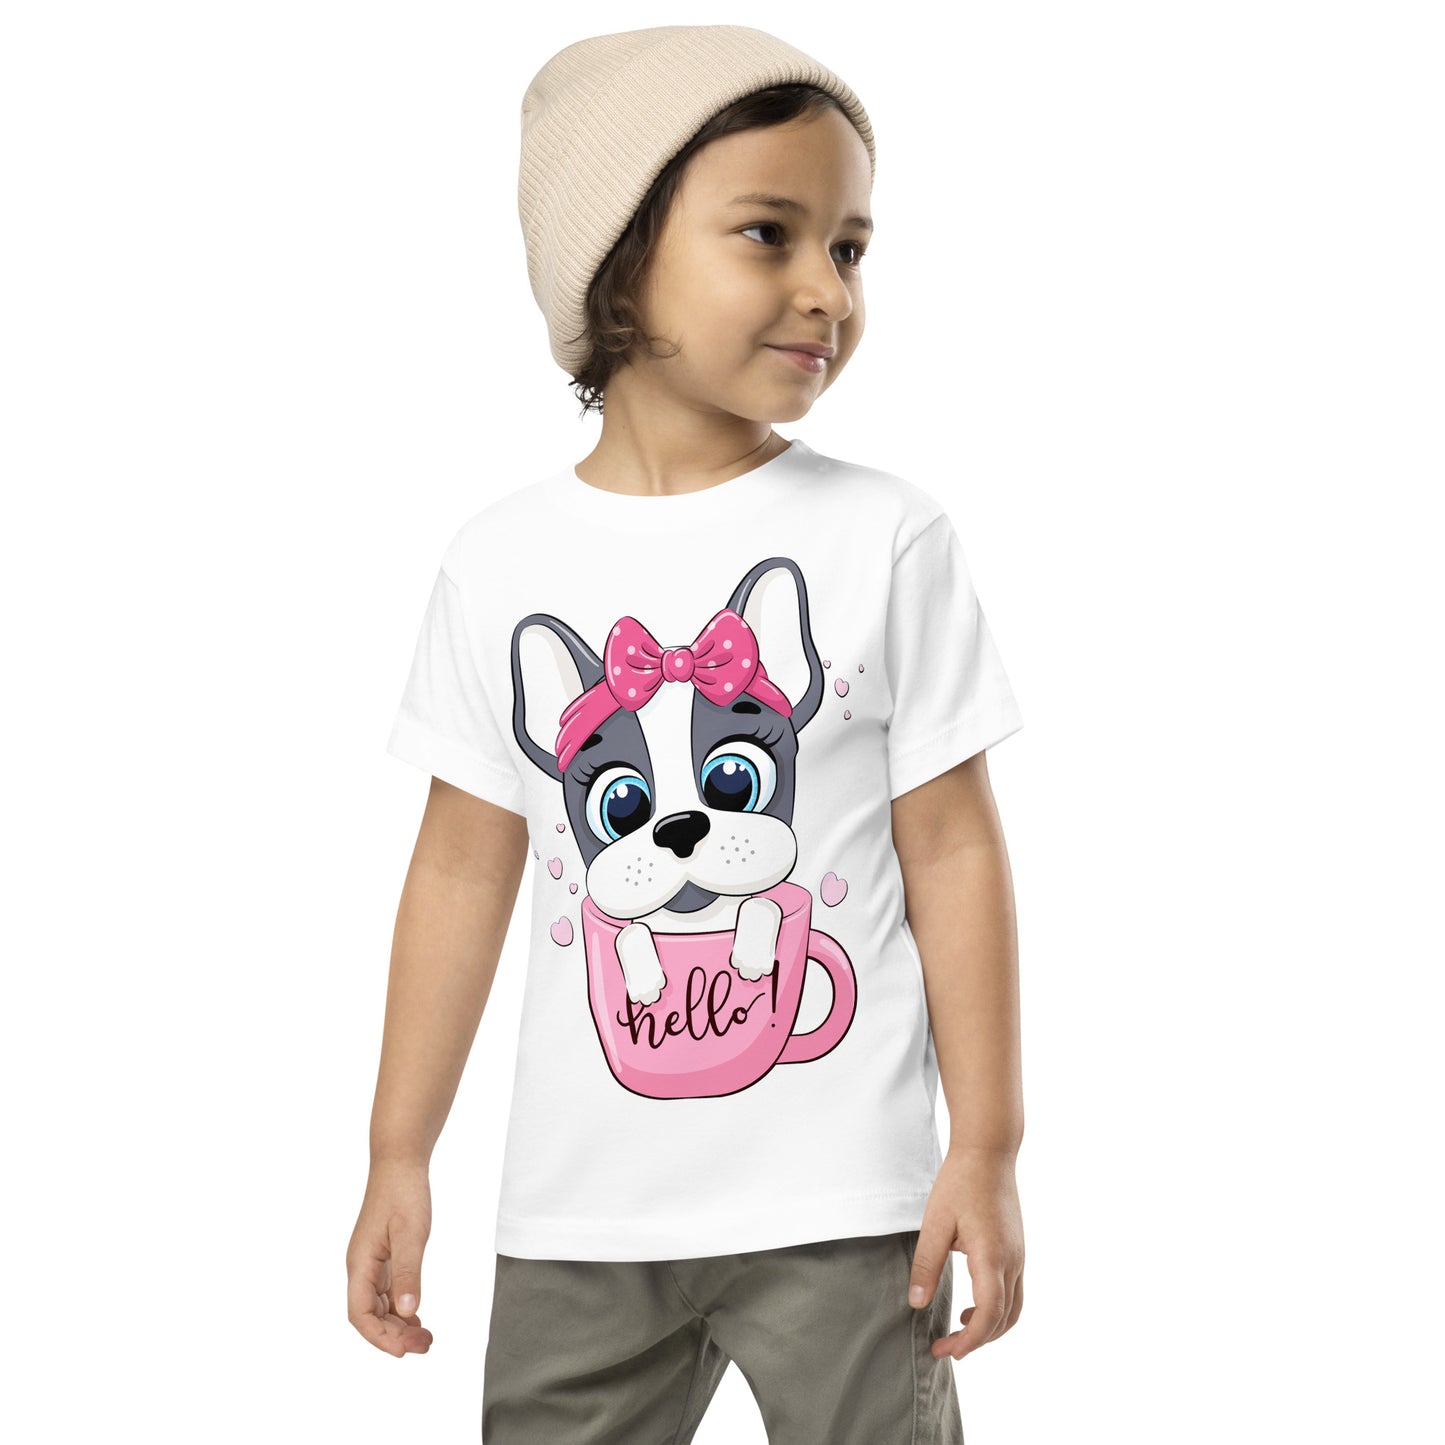 Cute Puppy Dog in Cup T-shirt, No. 0371